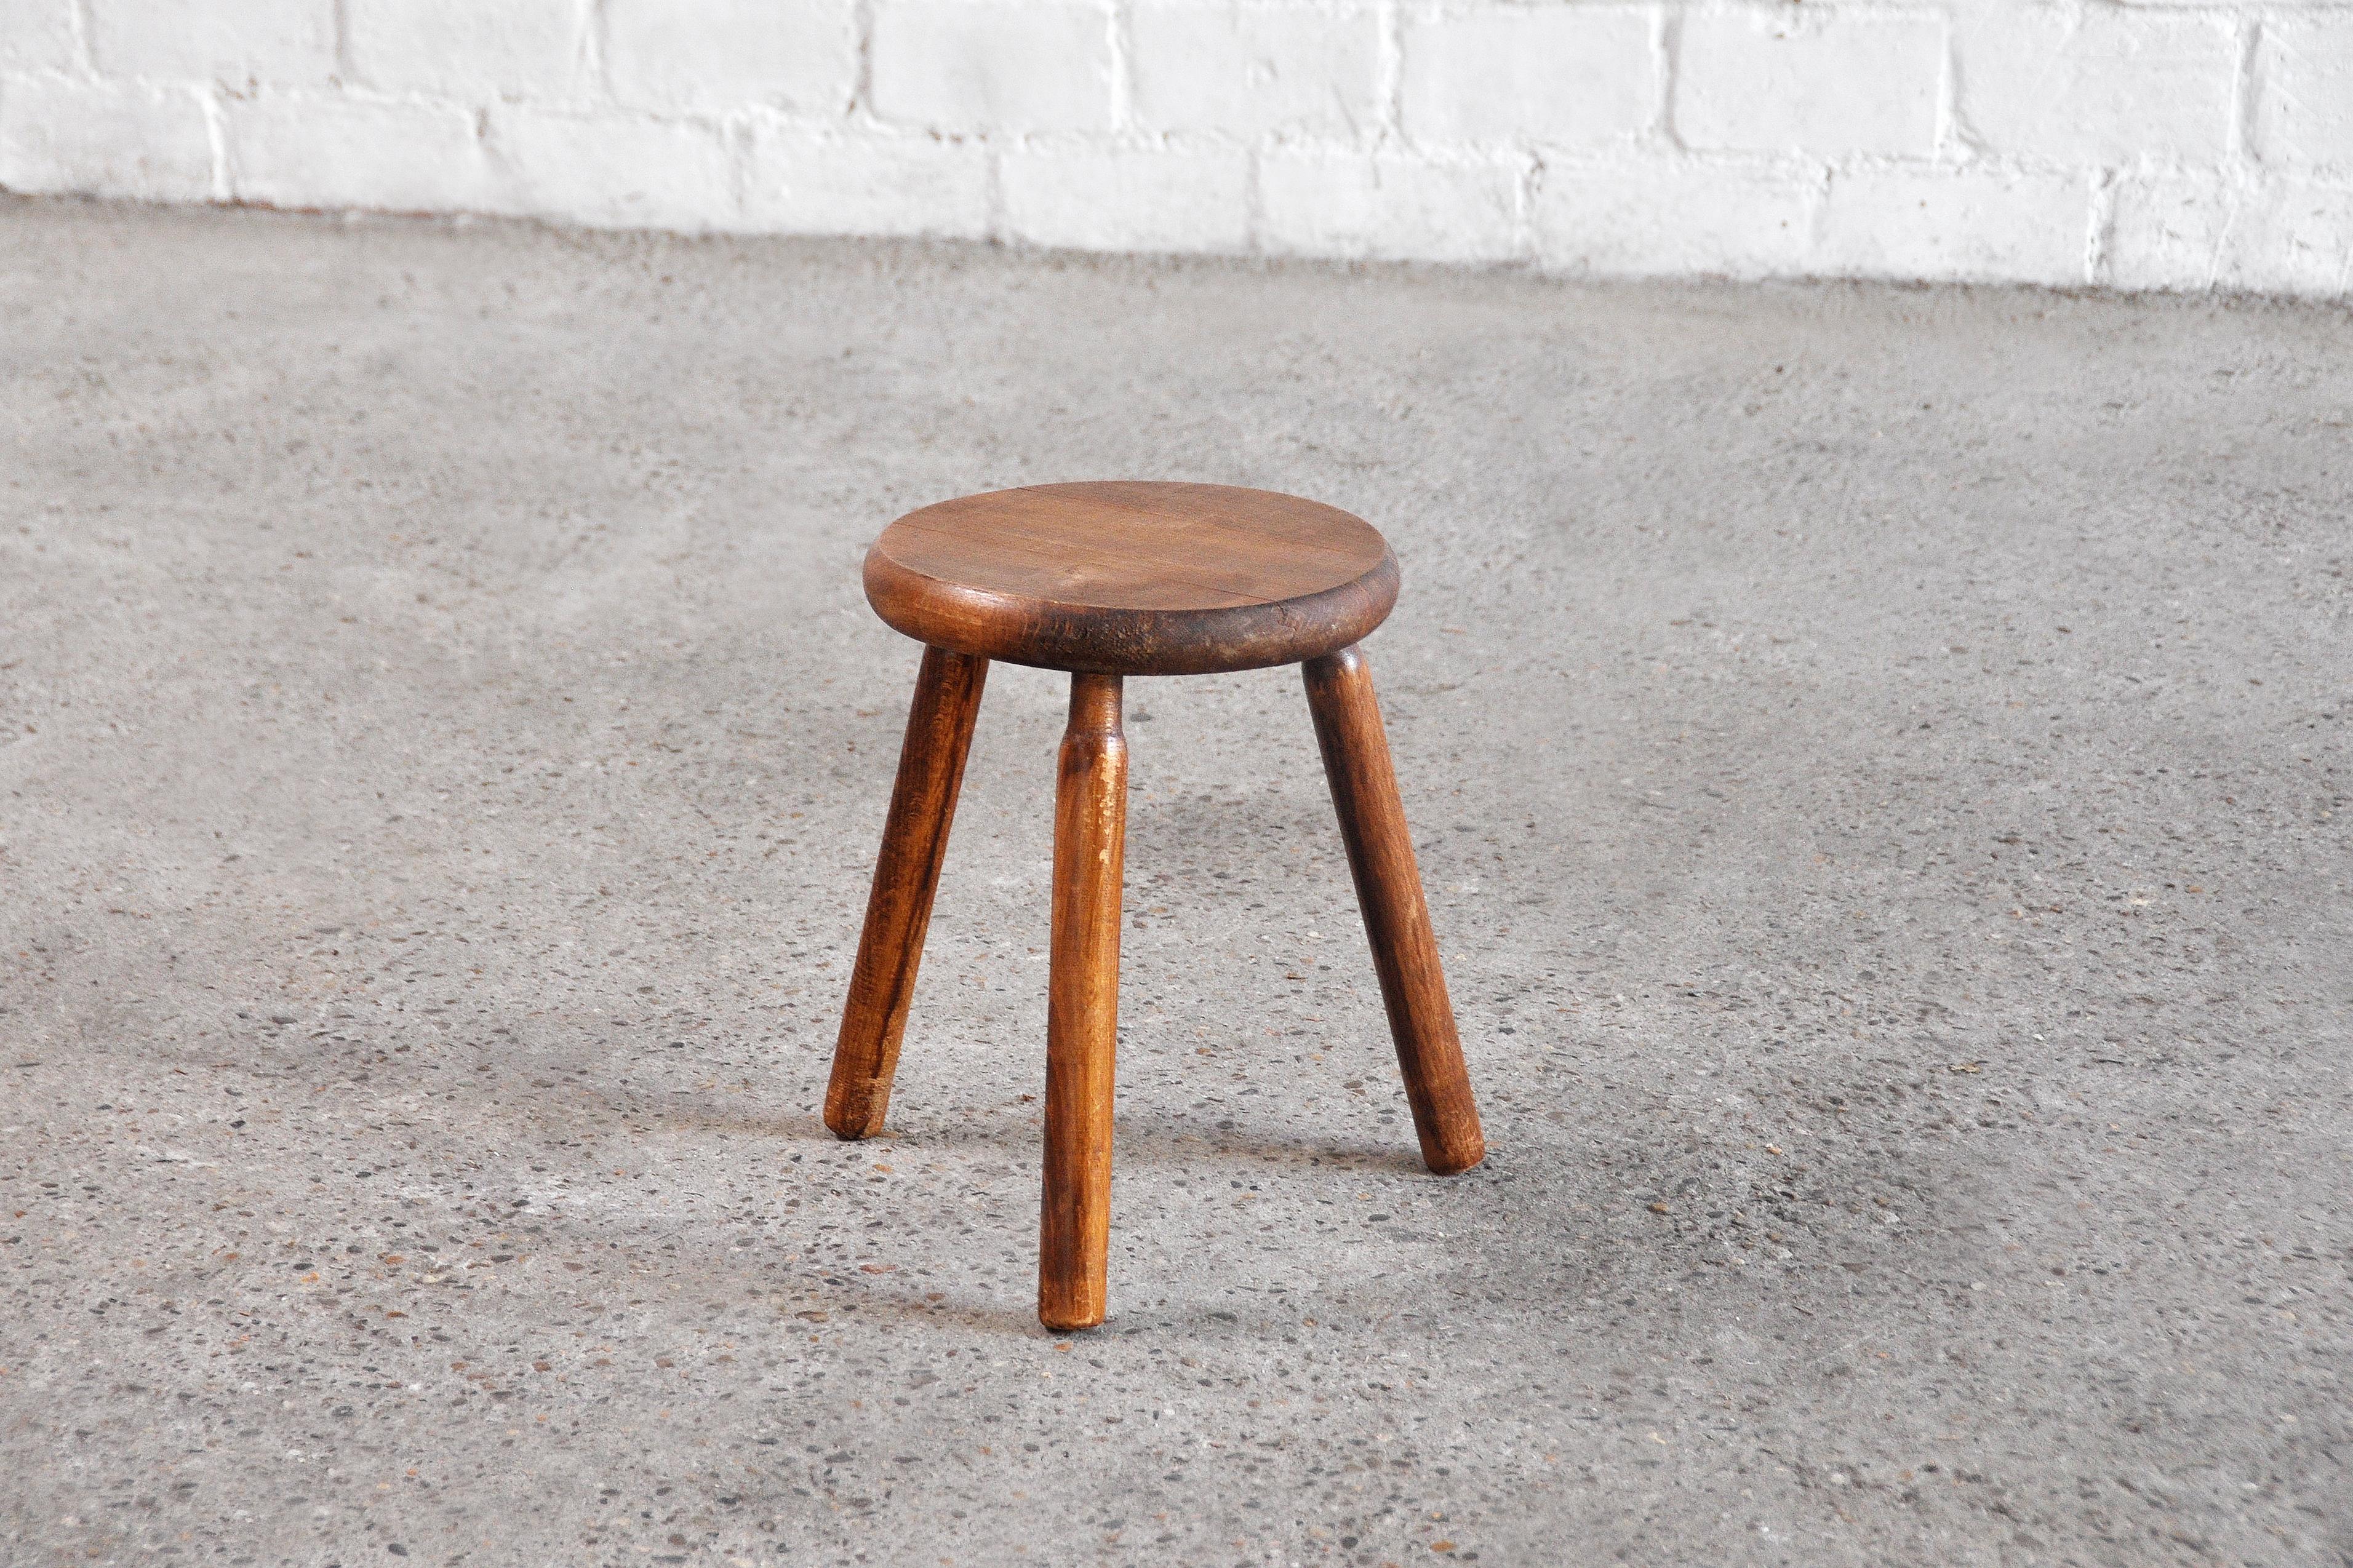 Vintage rustic tripod stool in the style of Charlotte Perriand, France, mid-20th century. Good vintage condition, structurally completely fine.